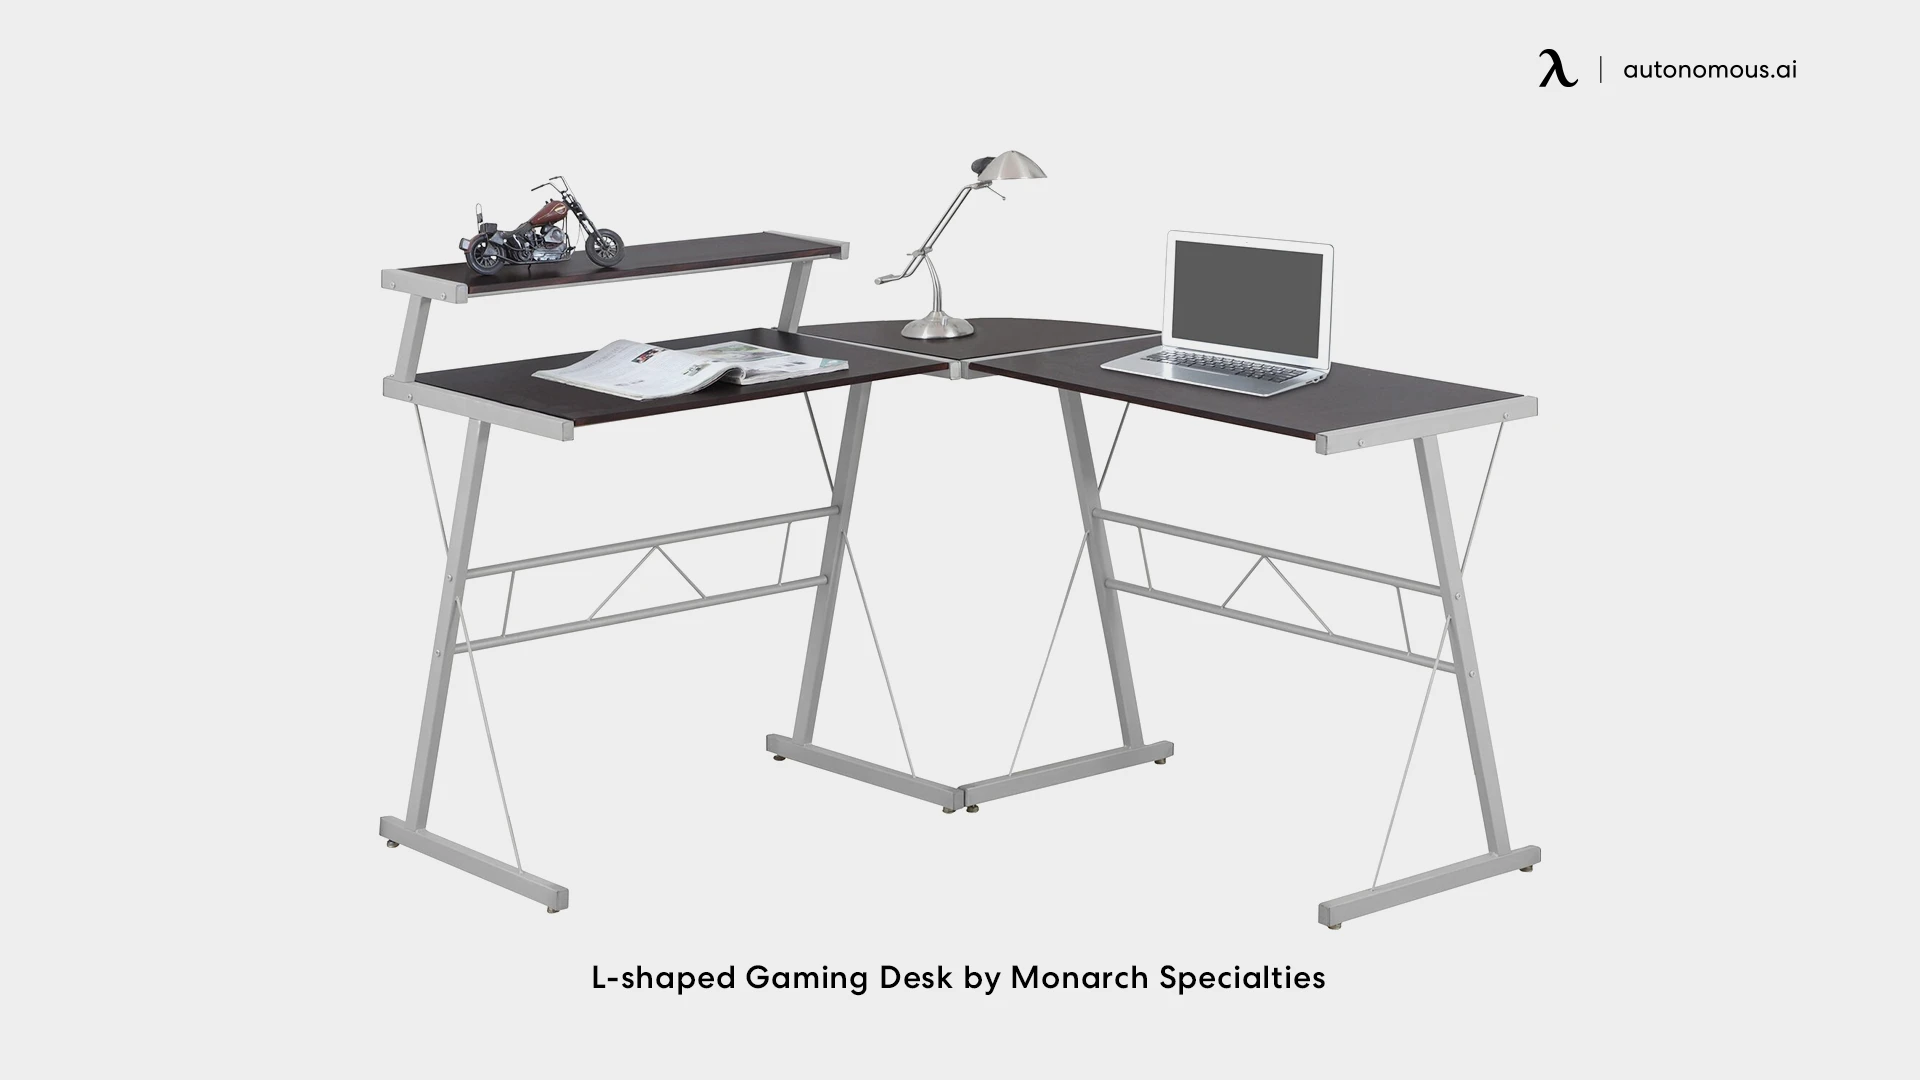 L-shaped Gaming Desk by Monarch Specialties